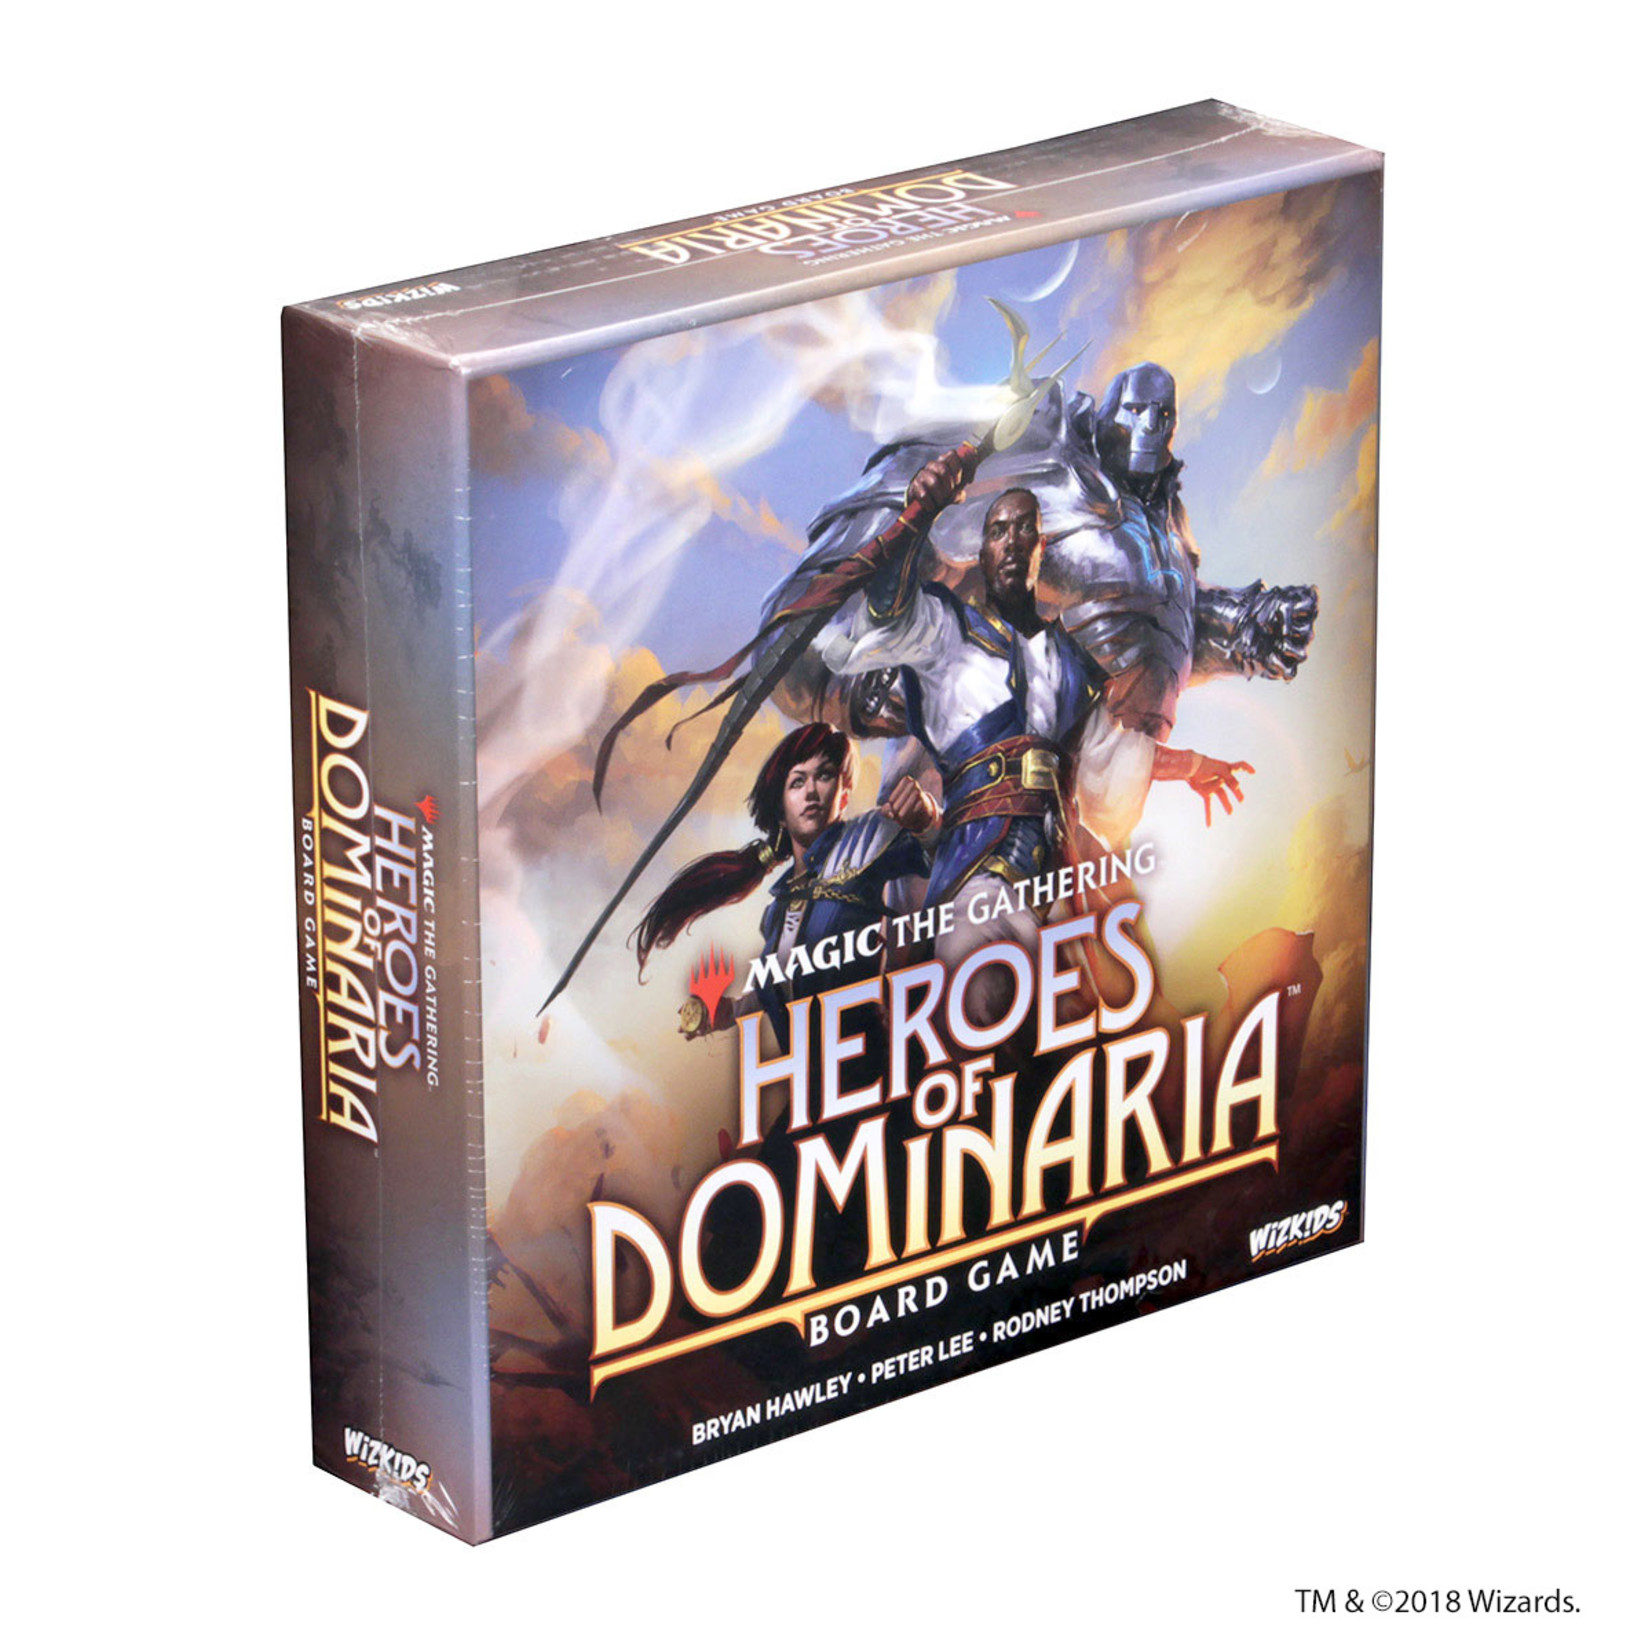 Magic The Gathering Heroes of Dominaria SE